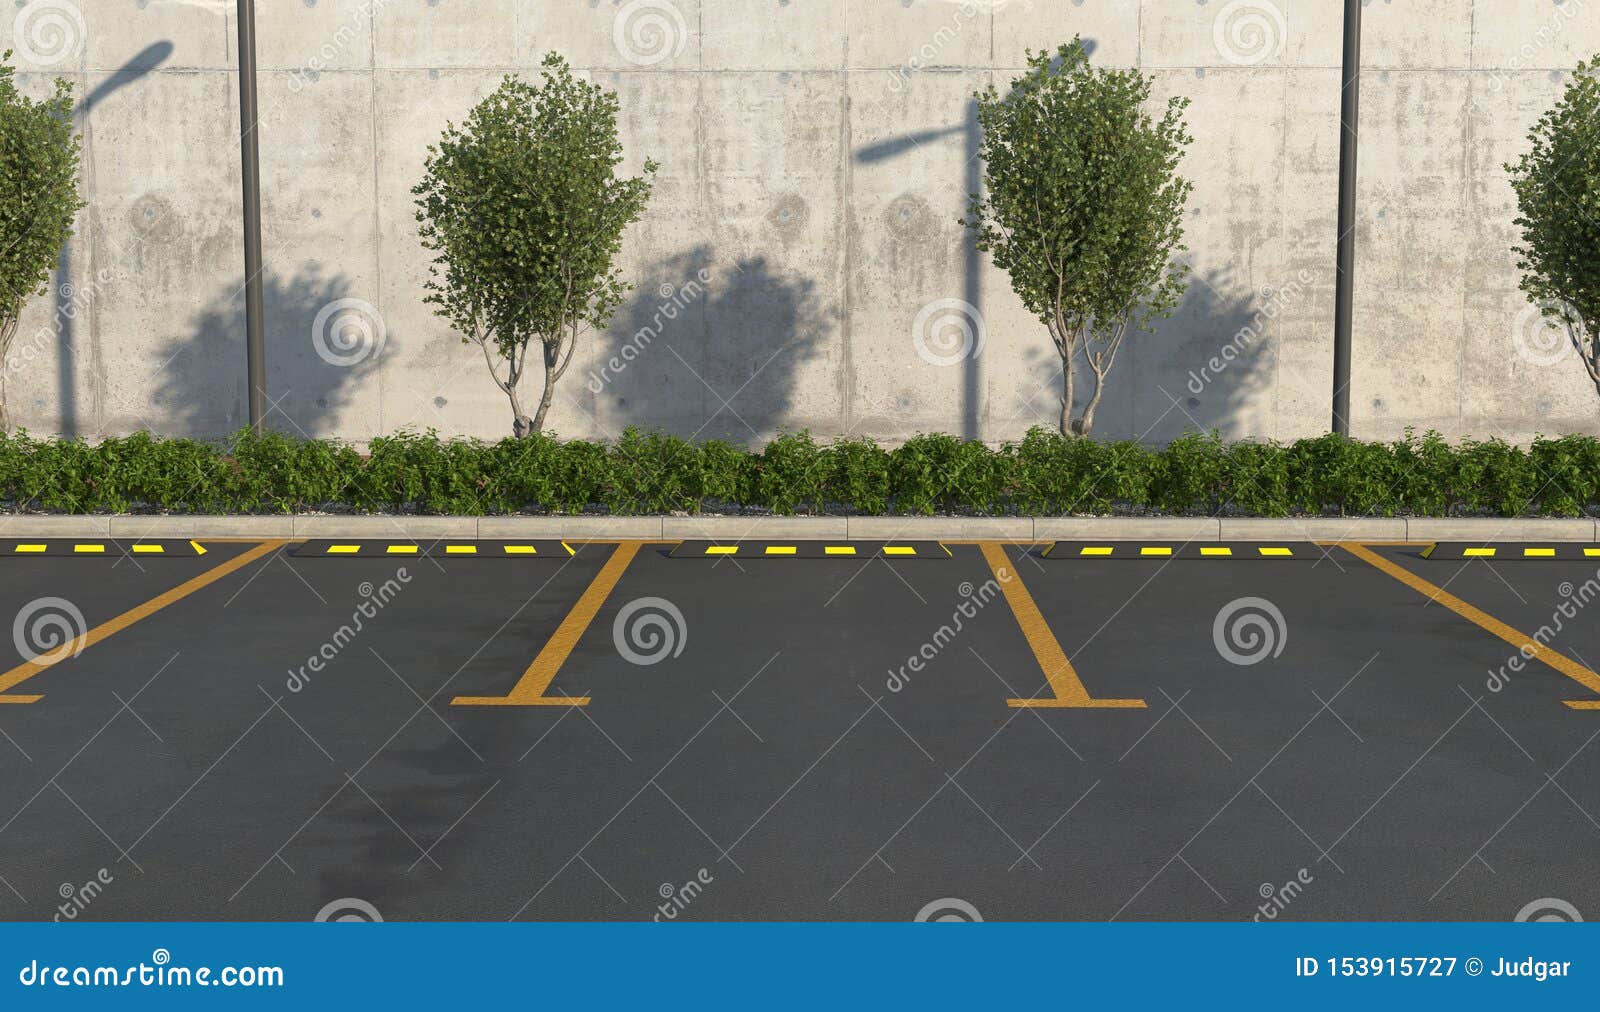 empty car parking without cars. parking spaces, sidewalk for pedestrians with flower bed.